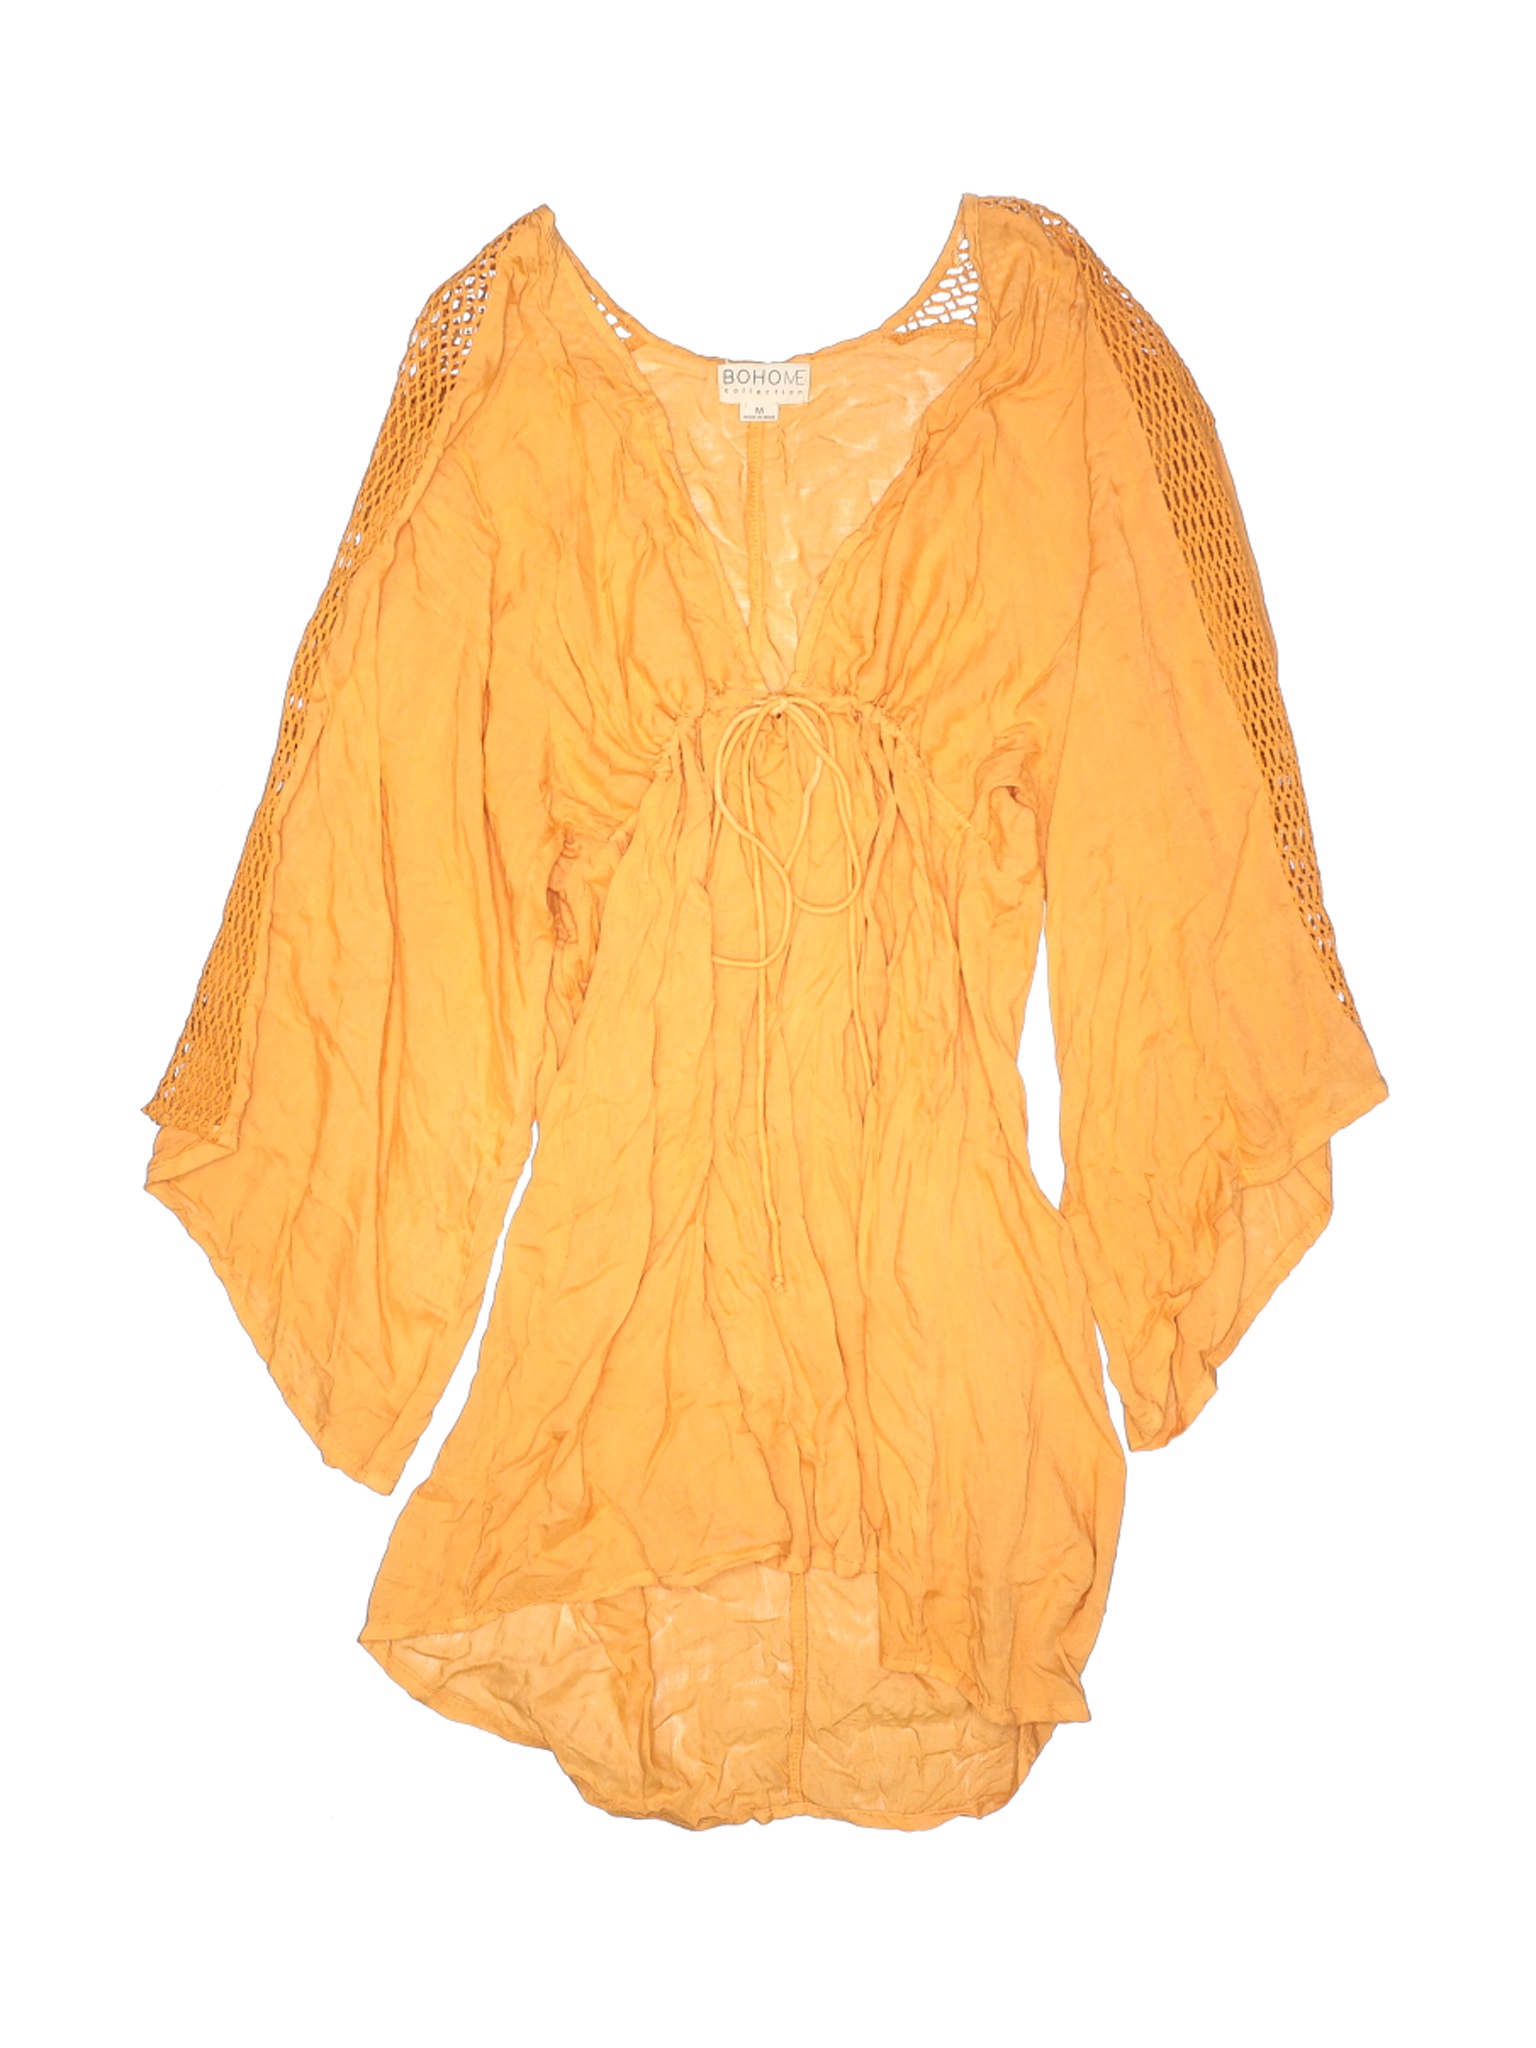 Assorted Brands Women Yellow Swimsuit Cover Up M | eBay